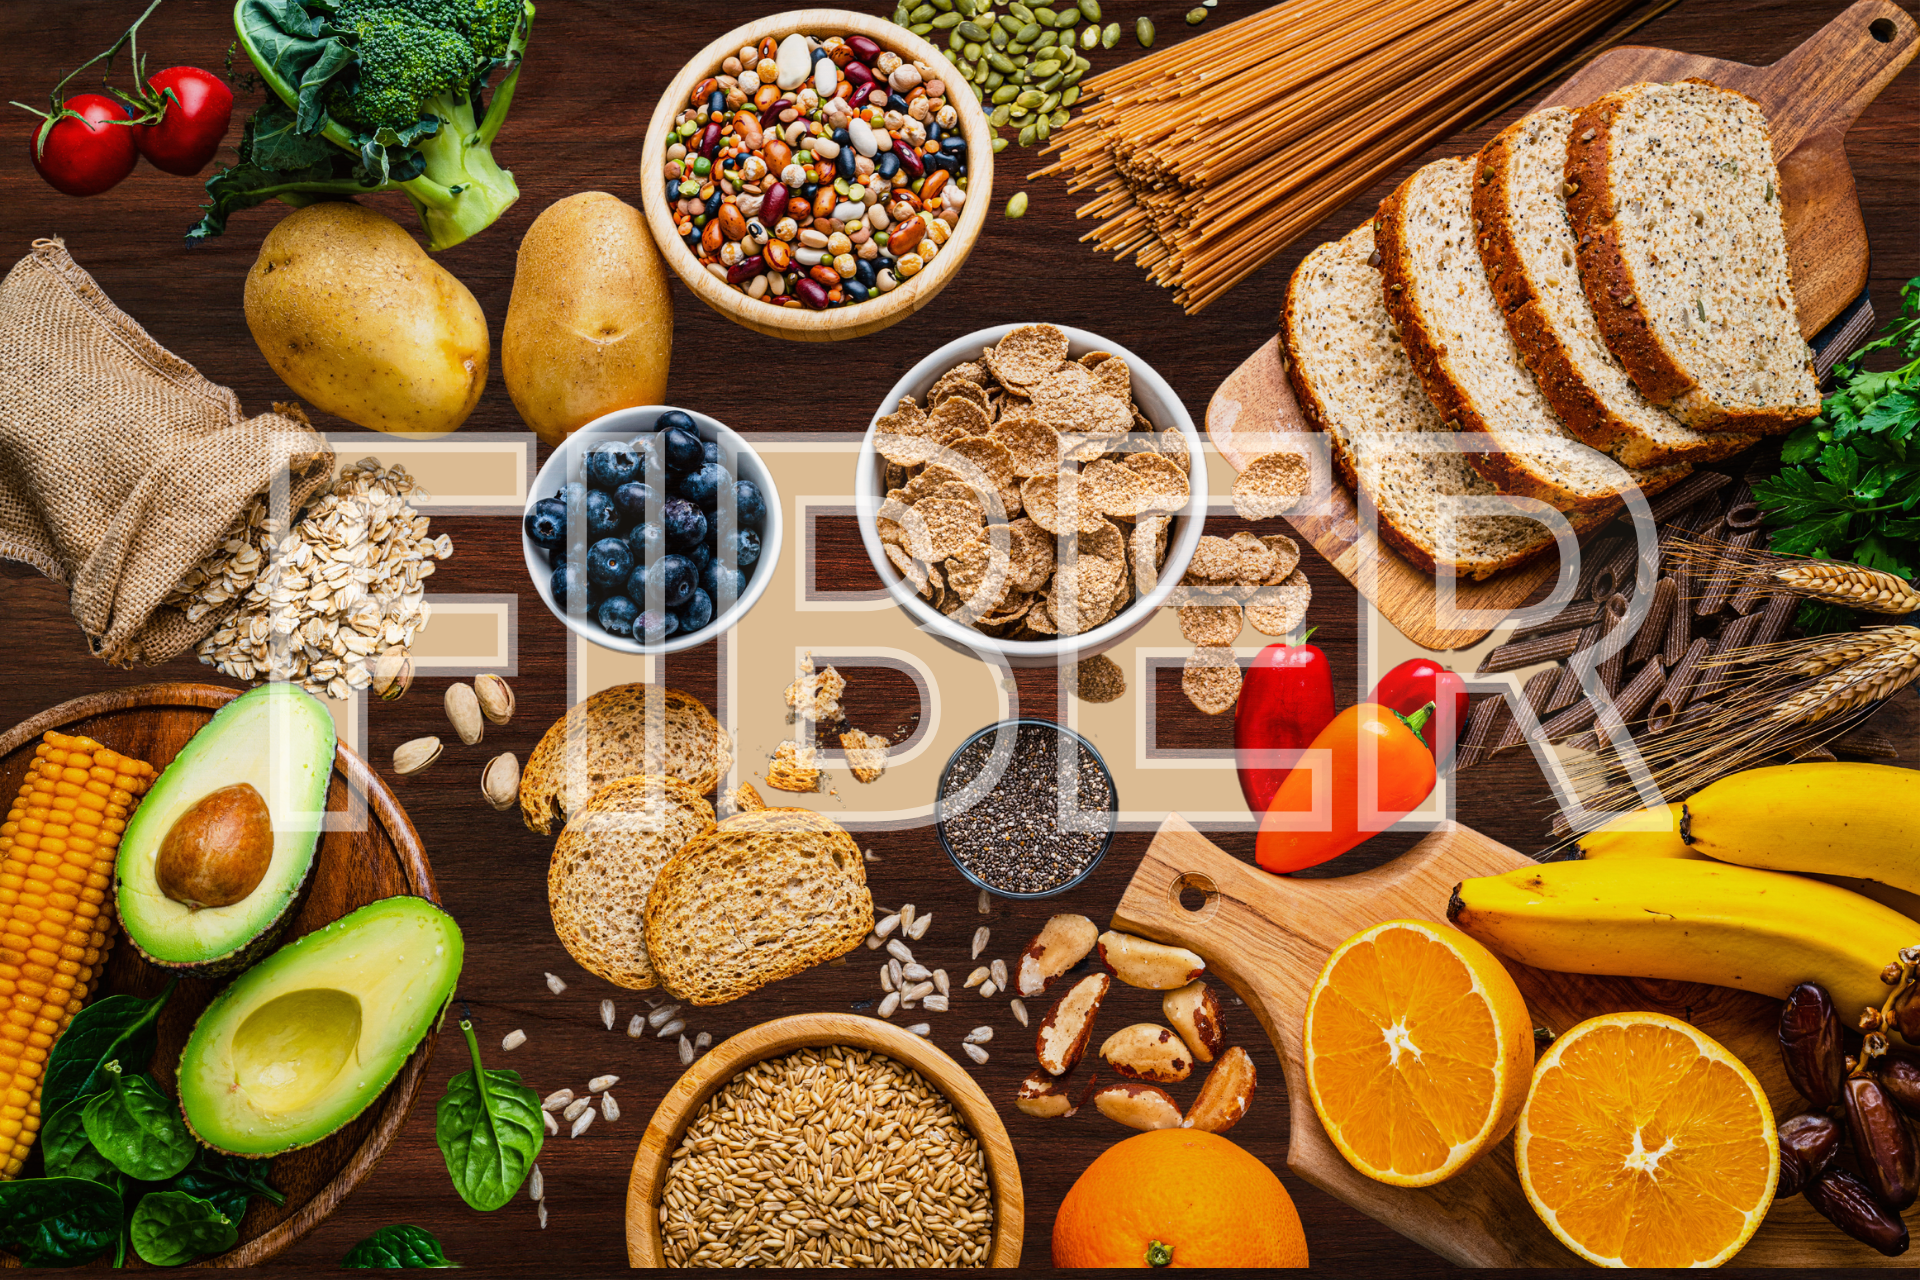 All sorts of high fiber foods in the table, edited with a text that says FIBER.